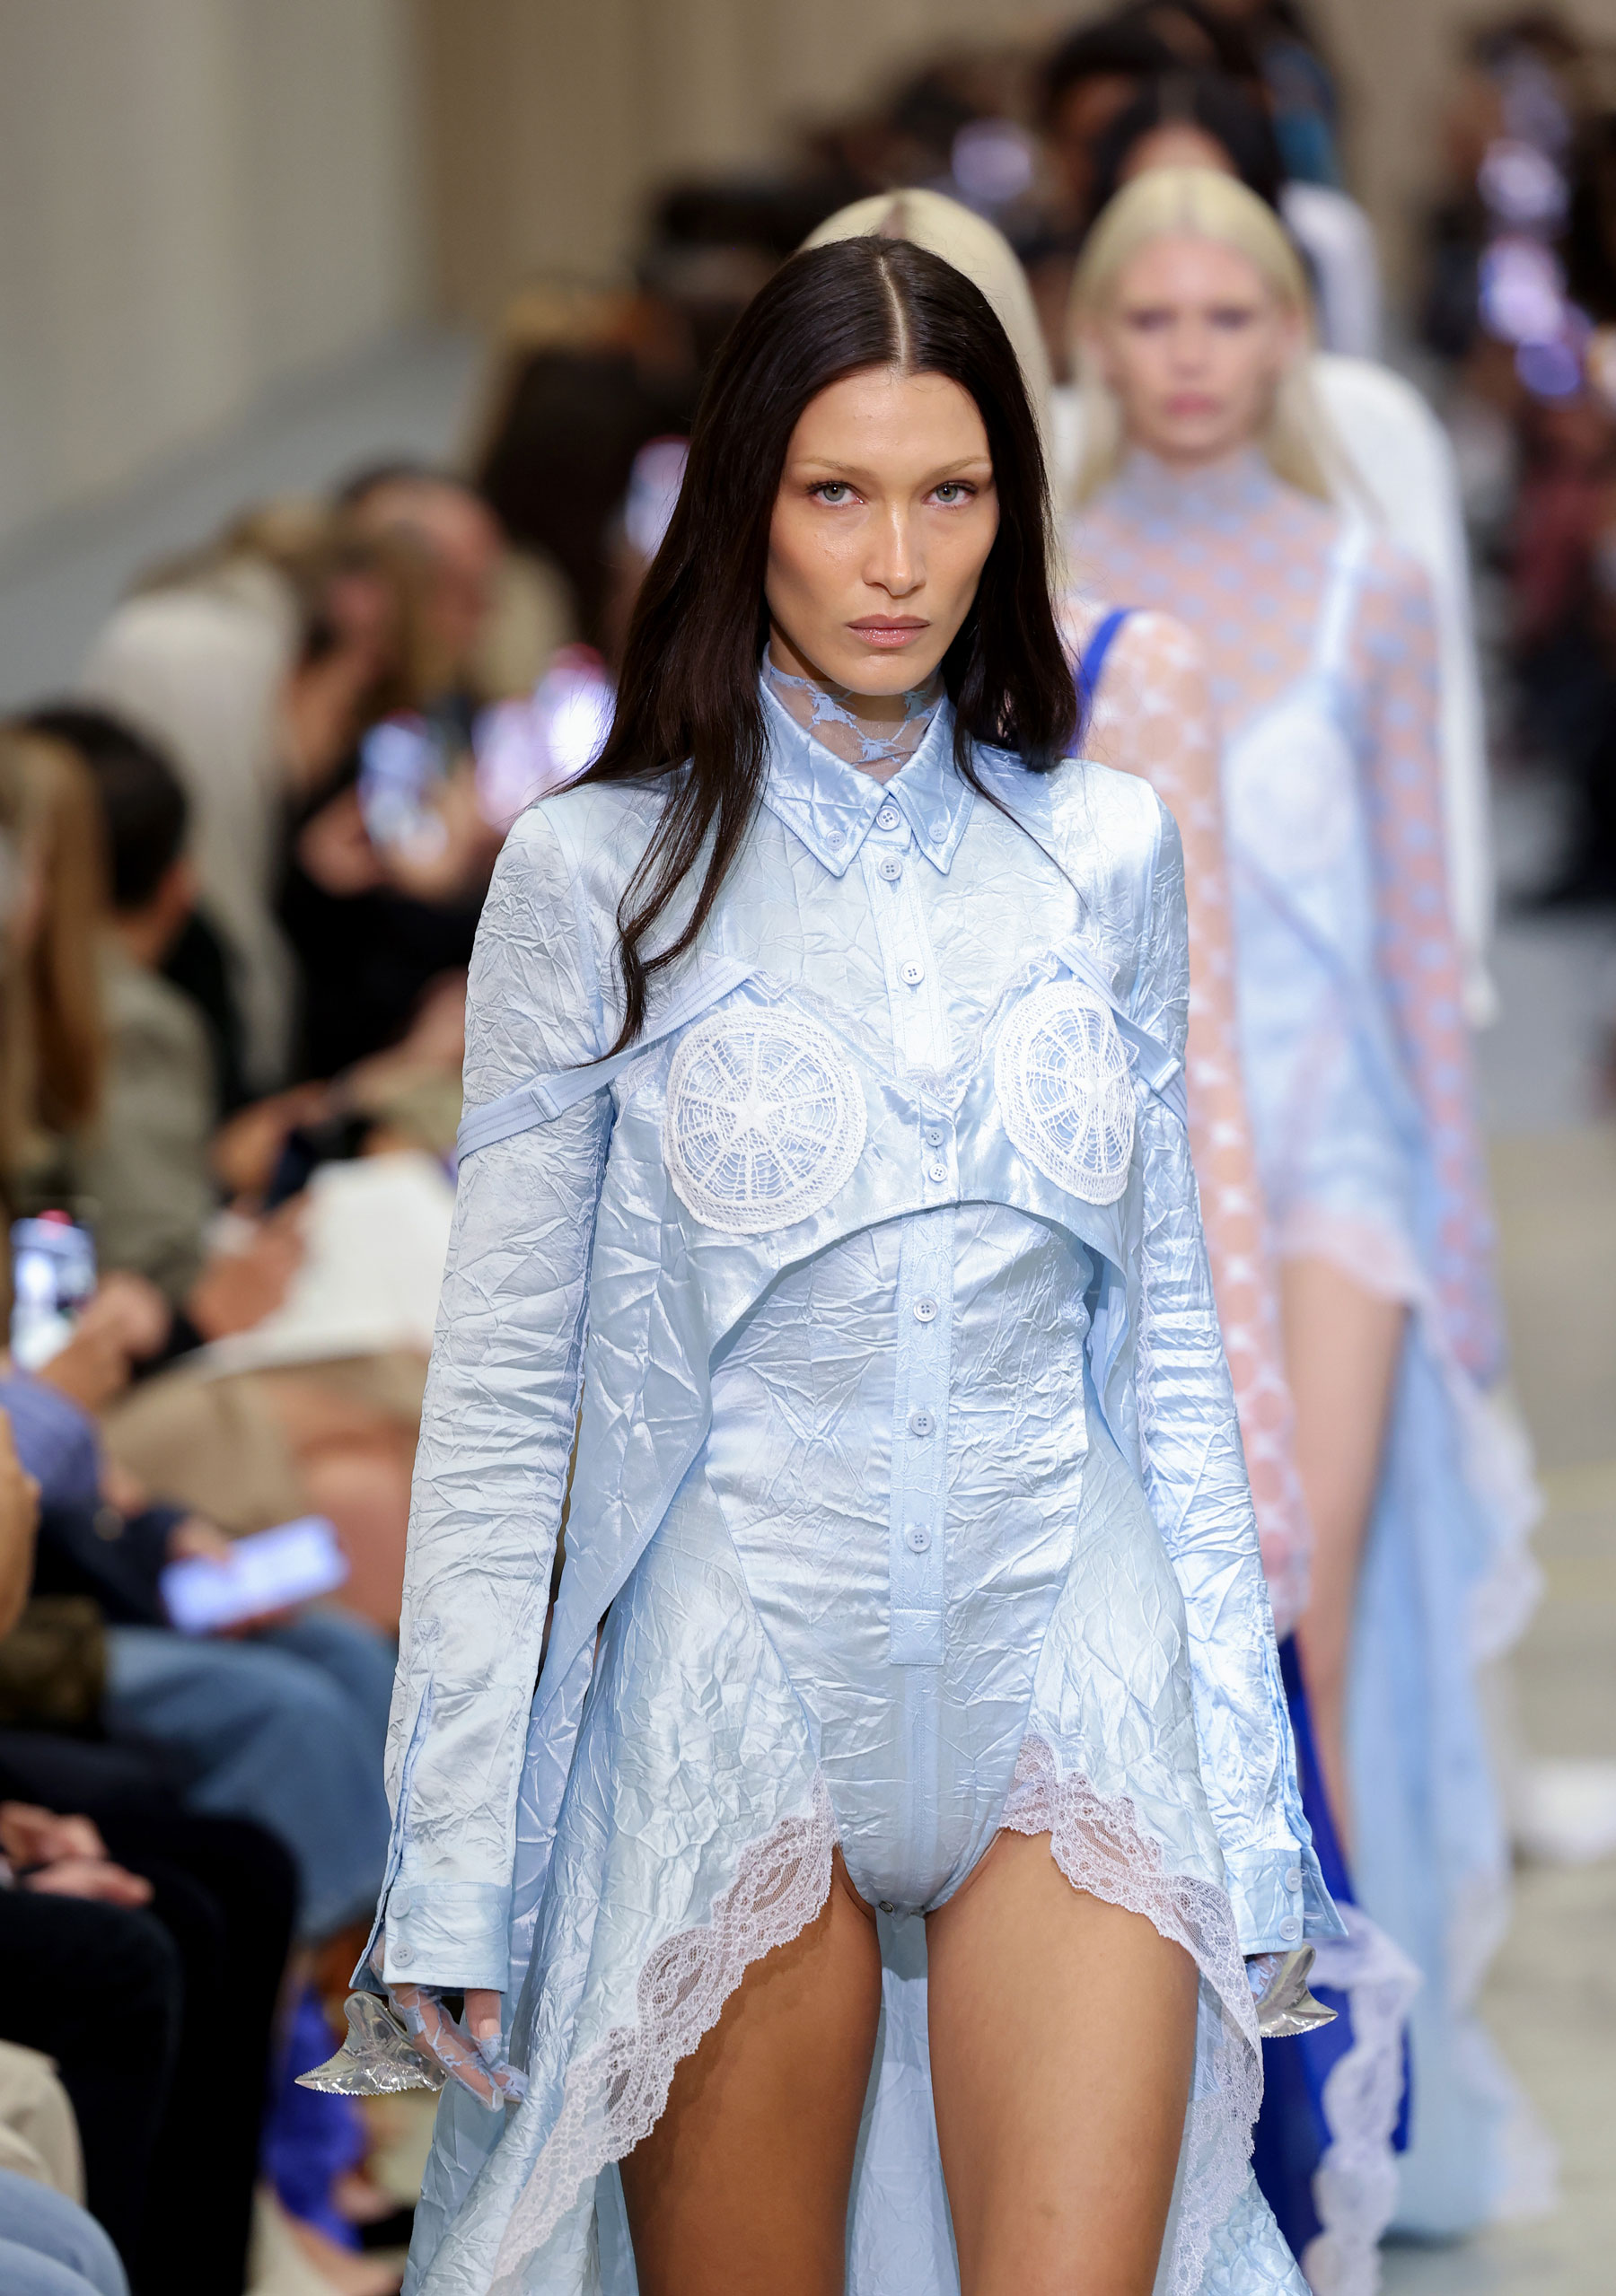 Bella Hadid walks the runway for Burberry wearing a light-blue outfit